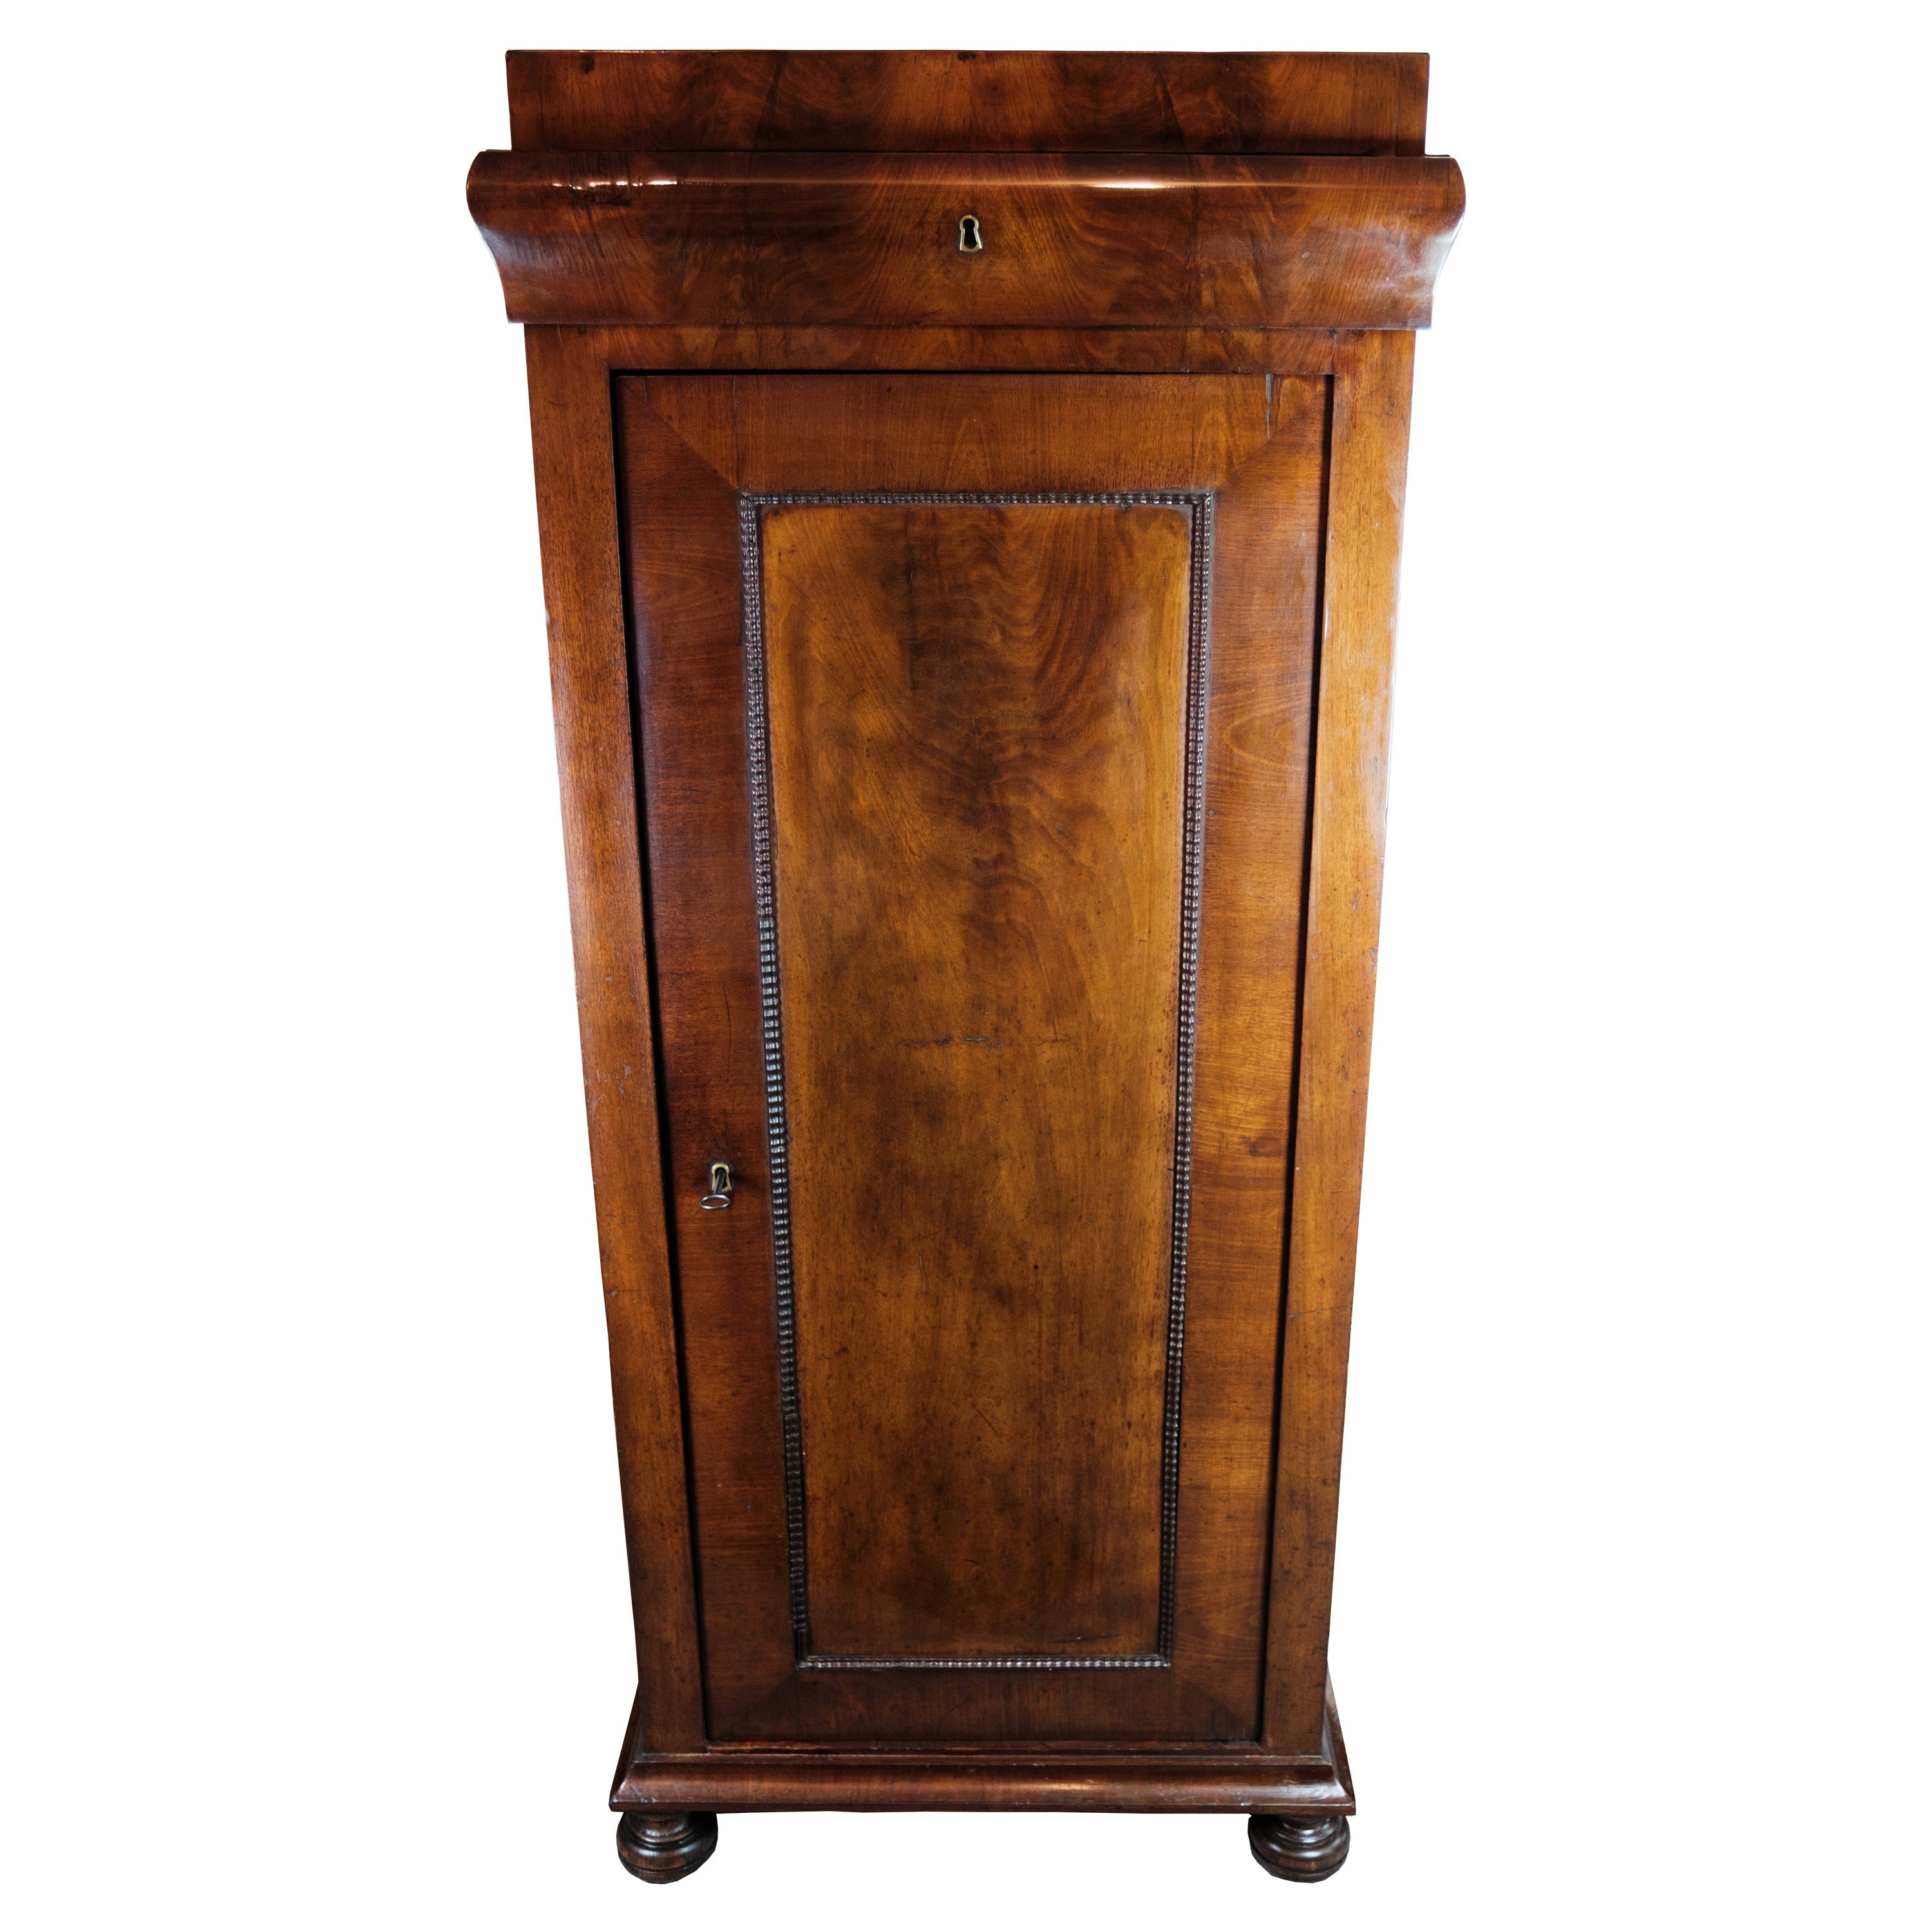 Late Empire Tall Cabinet of Dark Polished Mahogany From 1840s